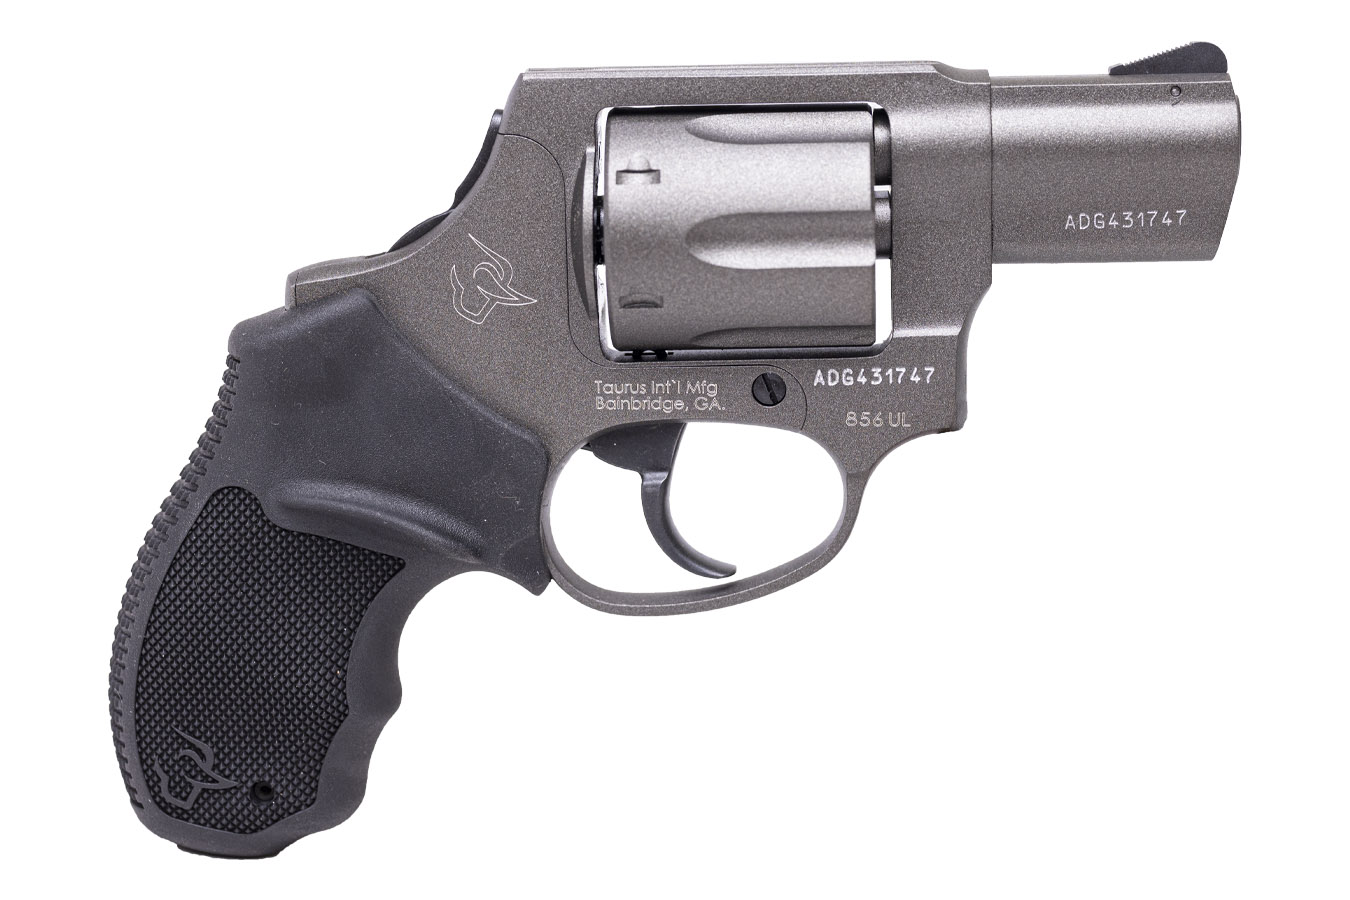 No. 25 Best Selling: TAURUS MODEL 856 38 SPECIAL REVOLVER WITH ANODIZED TUNGSTEN FINISH